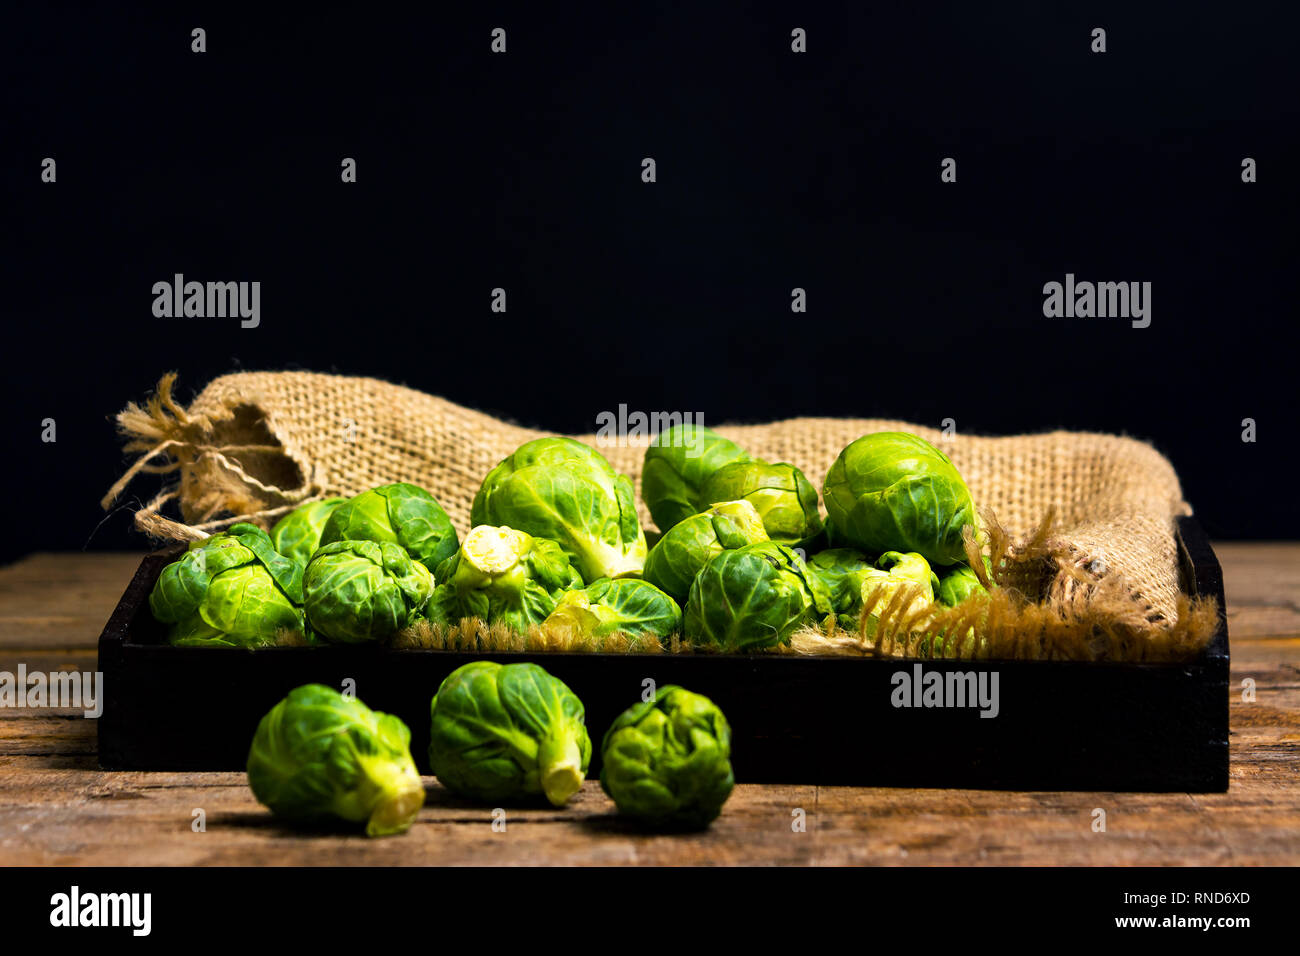 Brussels sprout vegetables in a bowl on a table Stock Photo